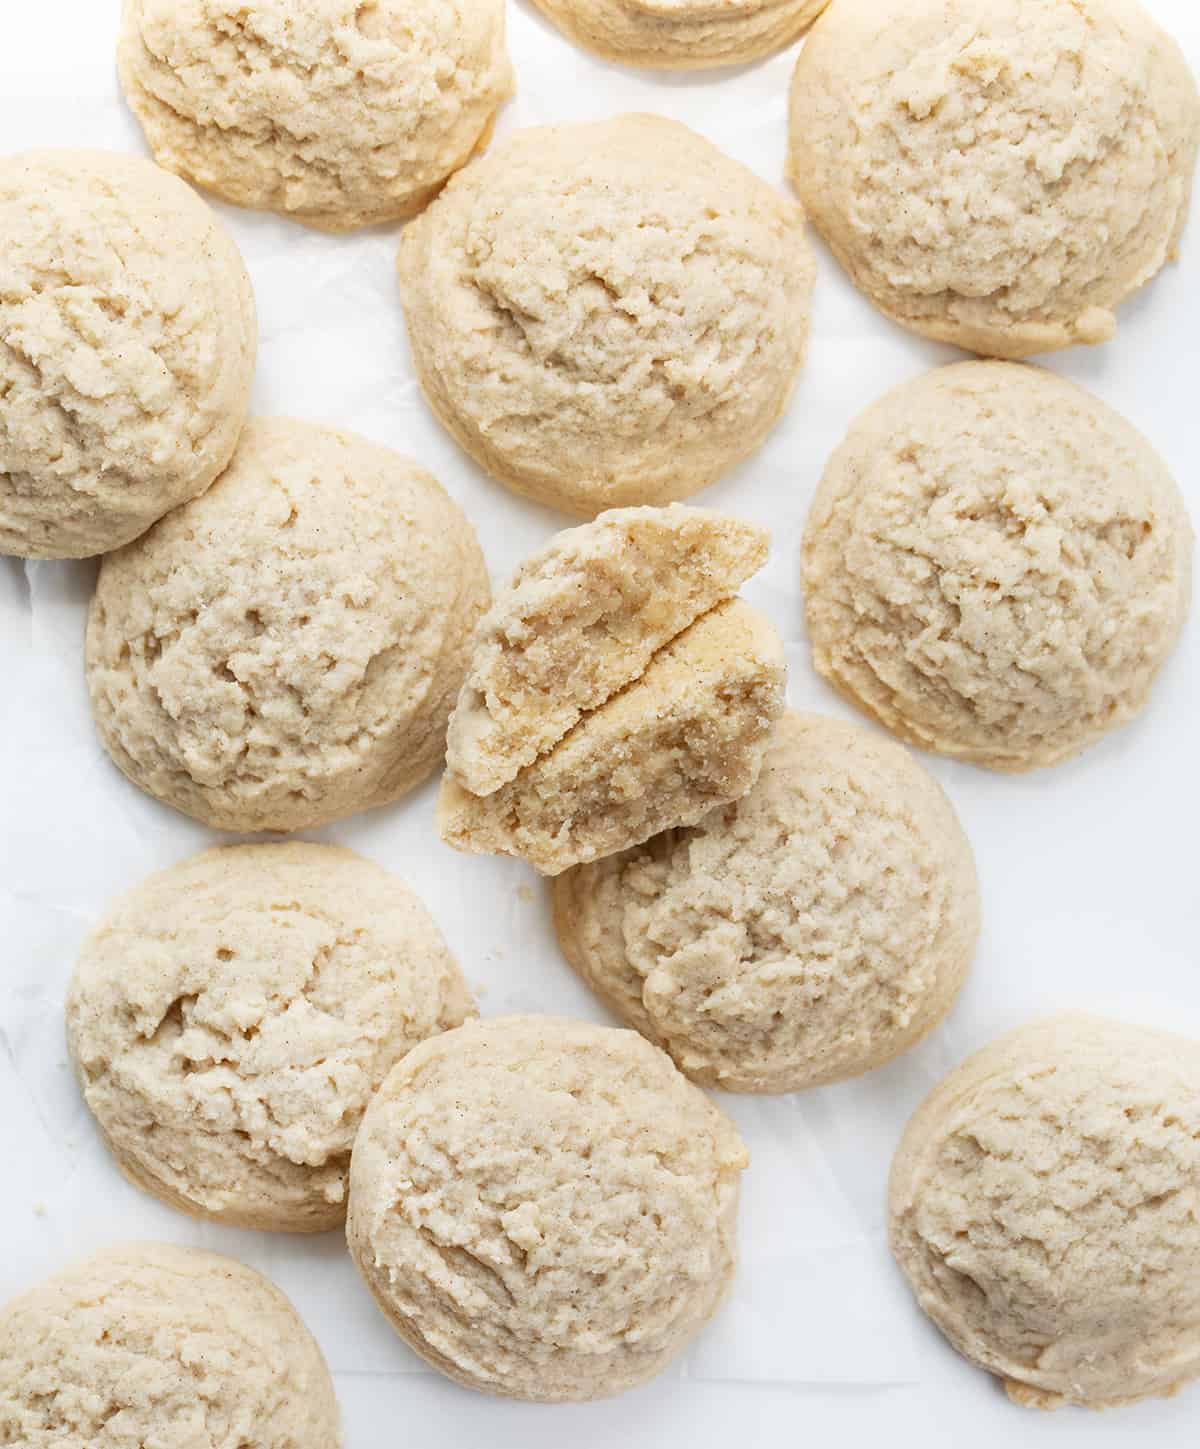 Cinnamon Butter Cookies on a White Counter With One Cookie Broken in Half.